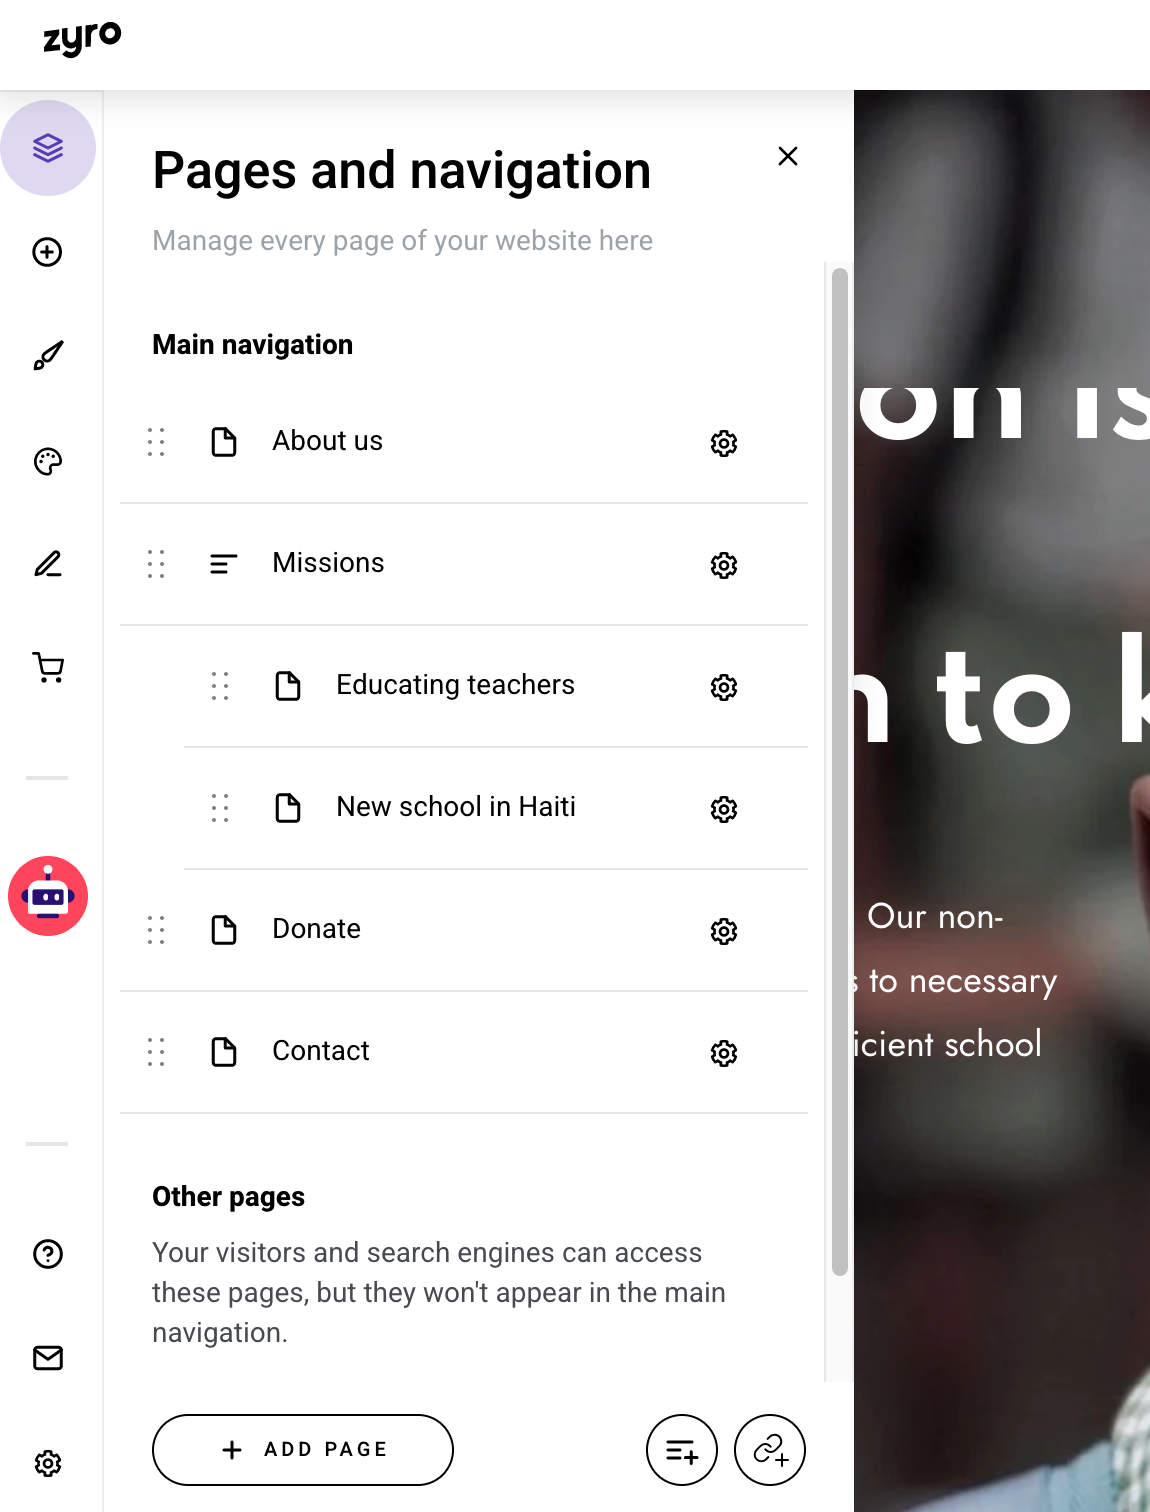 Zyro editor pages and navigation menu 